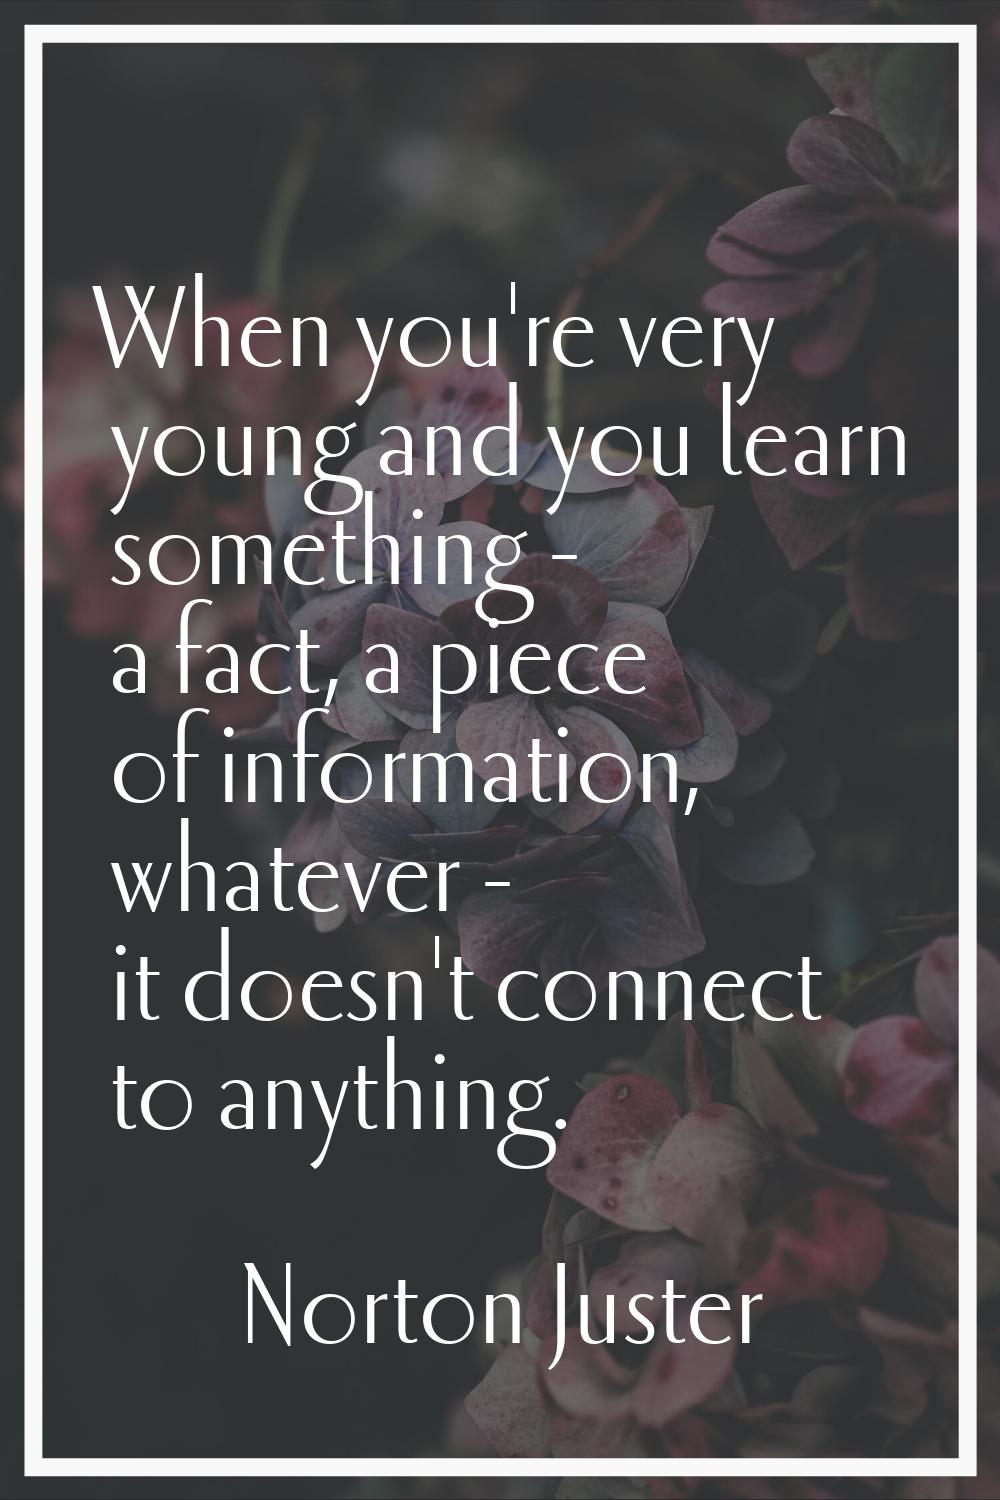 When you're very young and you learn something - a fact, a piece of information, whatever - it does